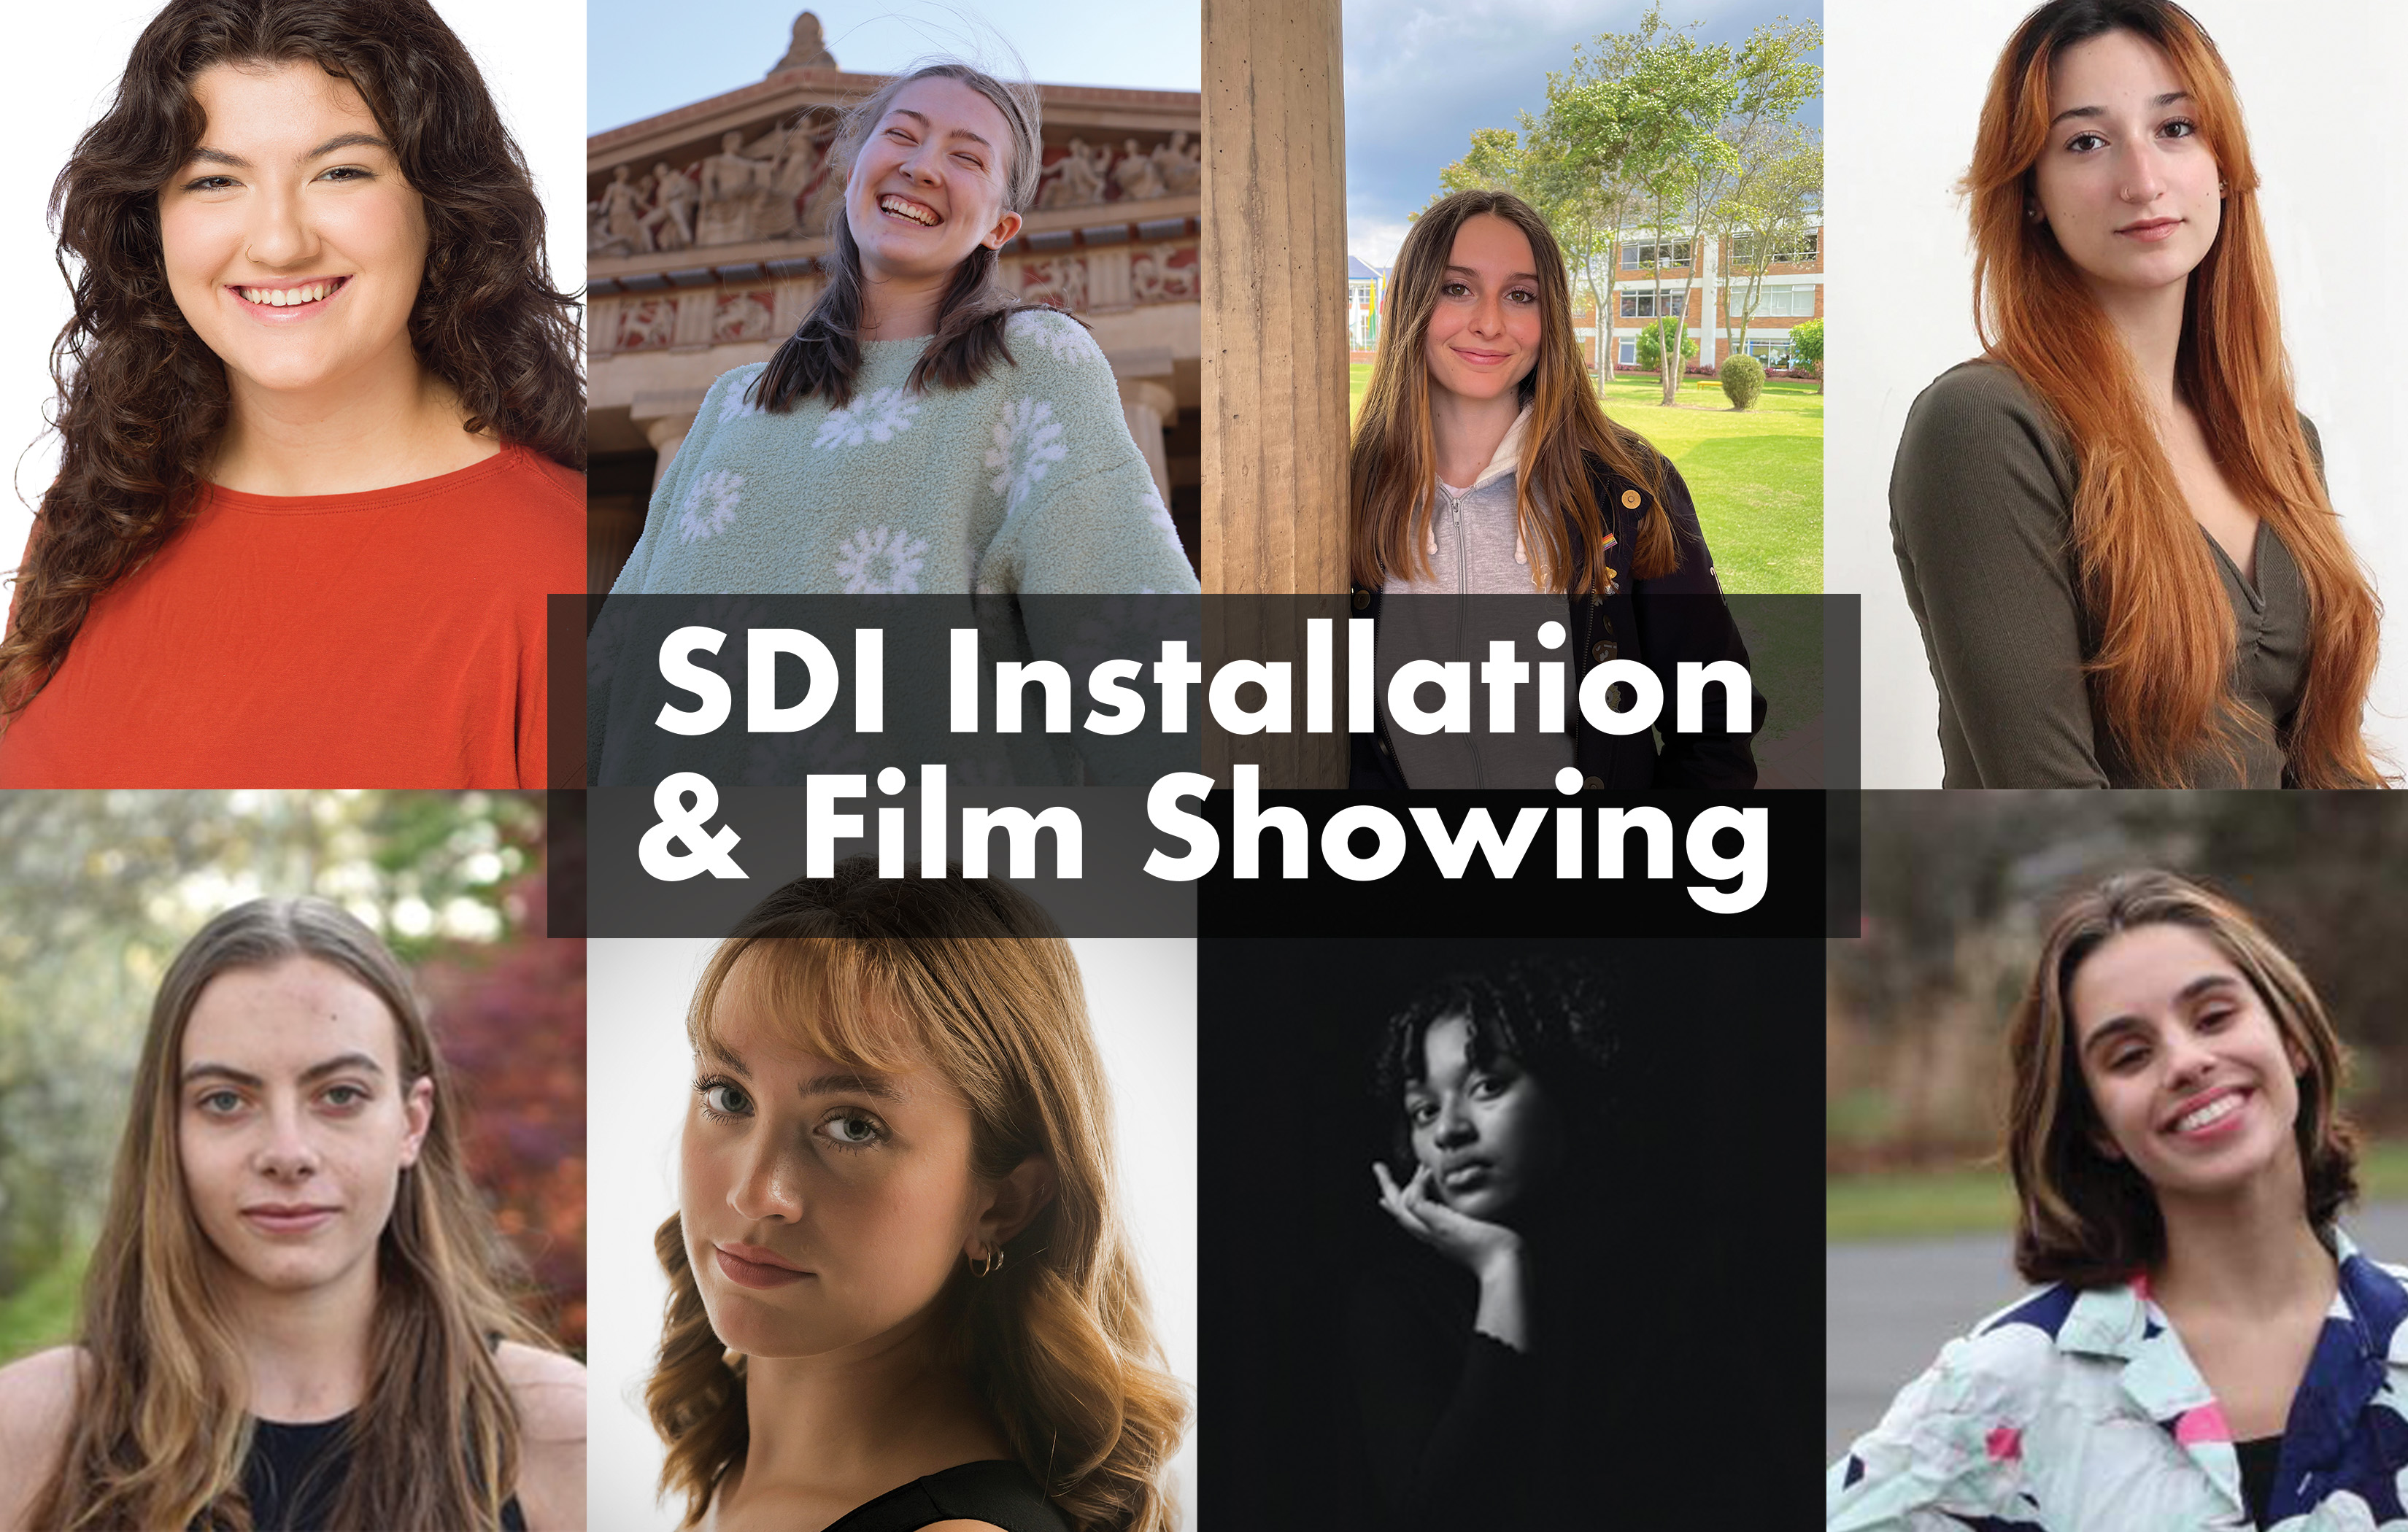 Image for SDI Installation and Film Showing Program